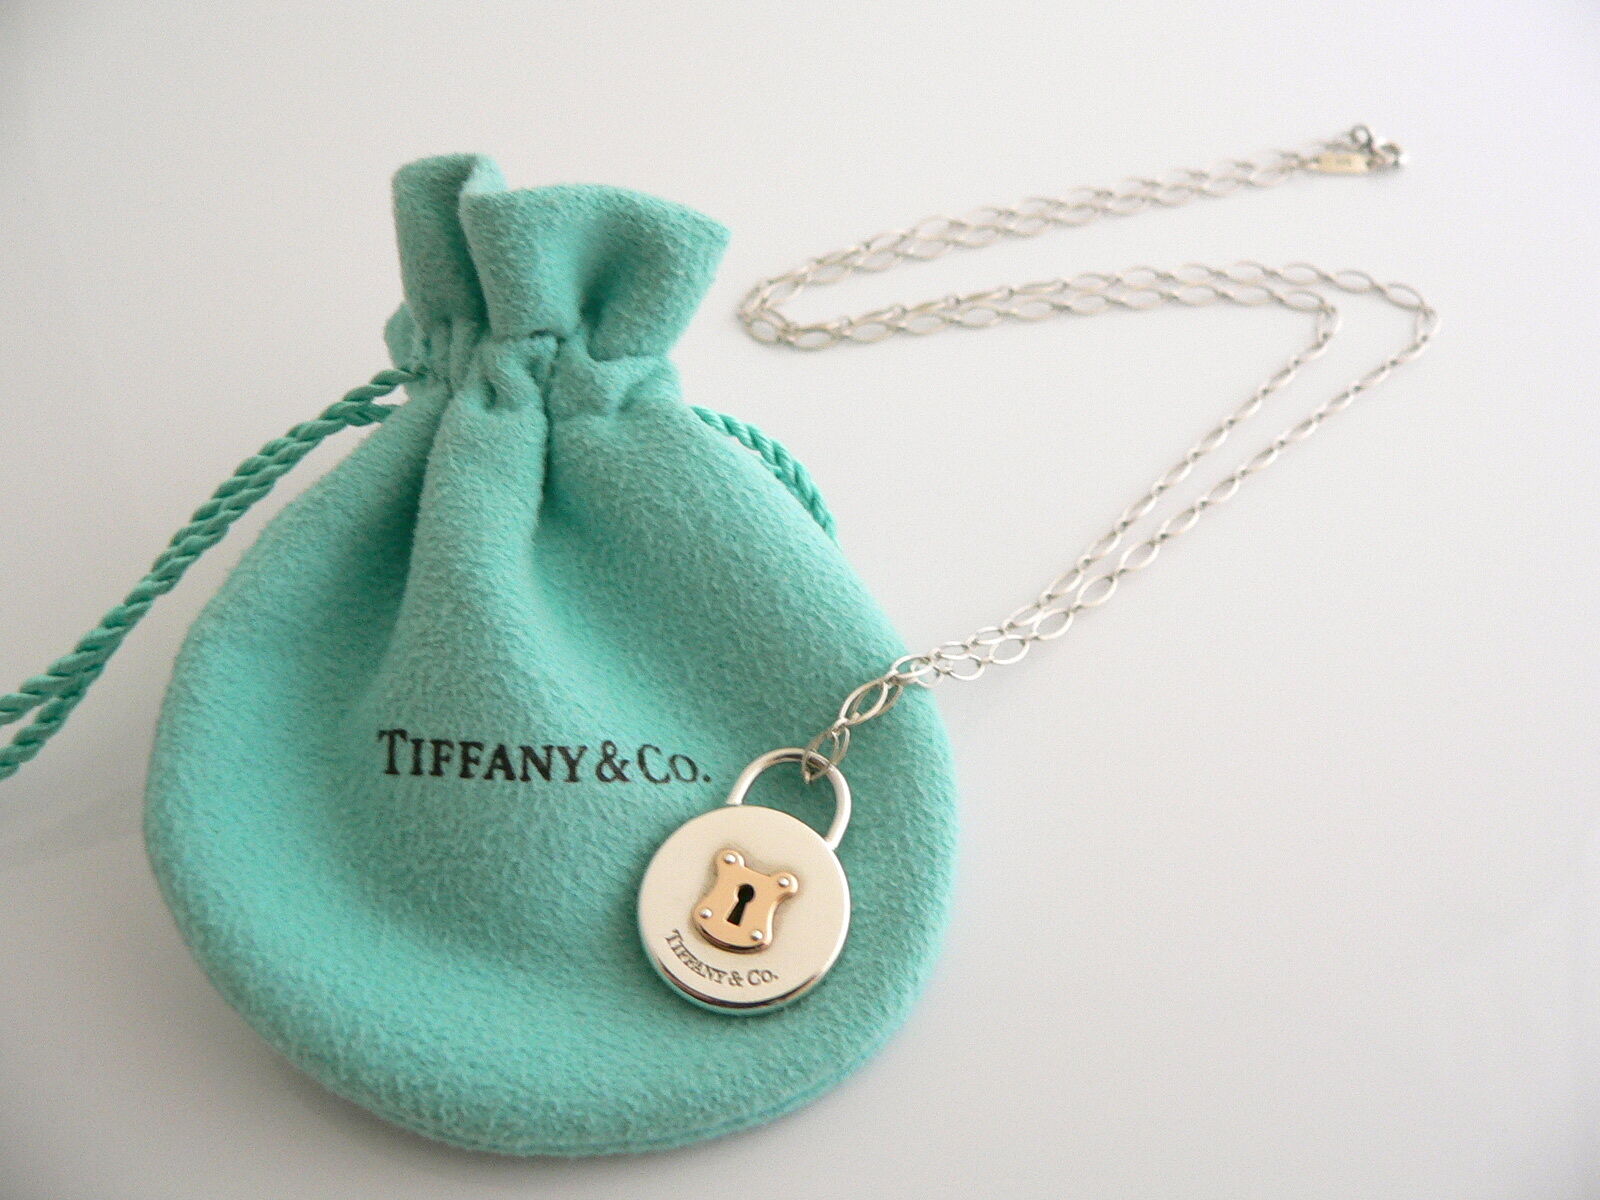 tiffany oval link chain